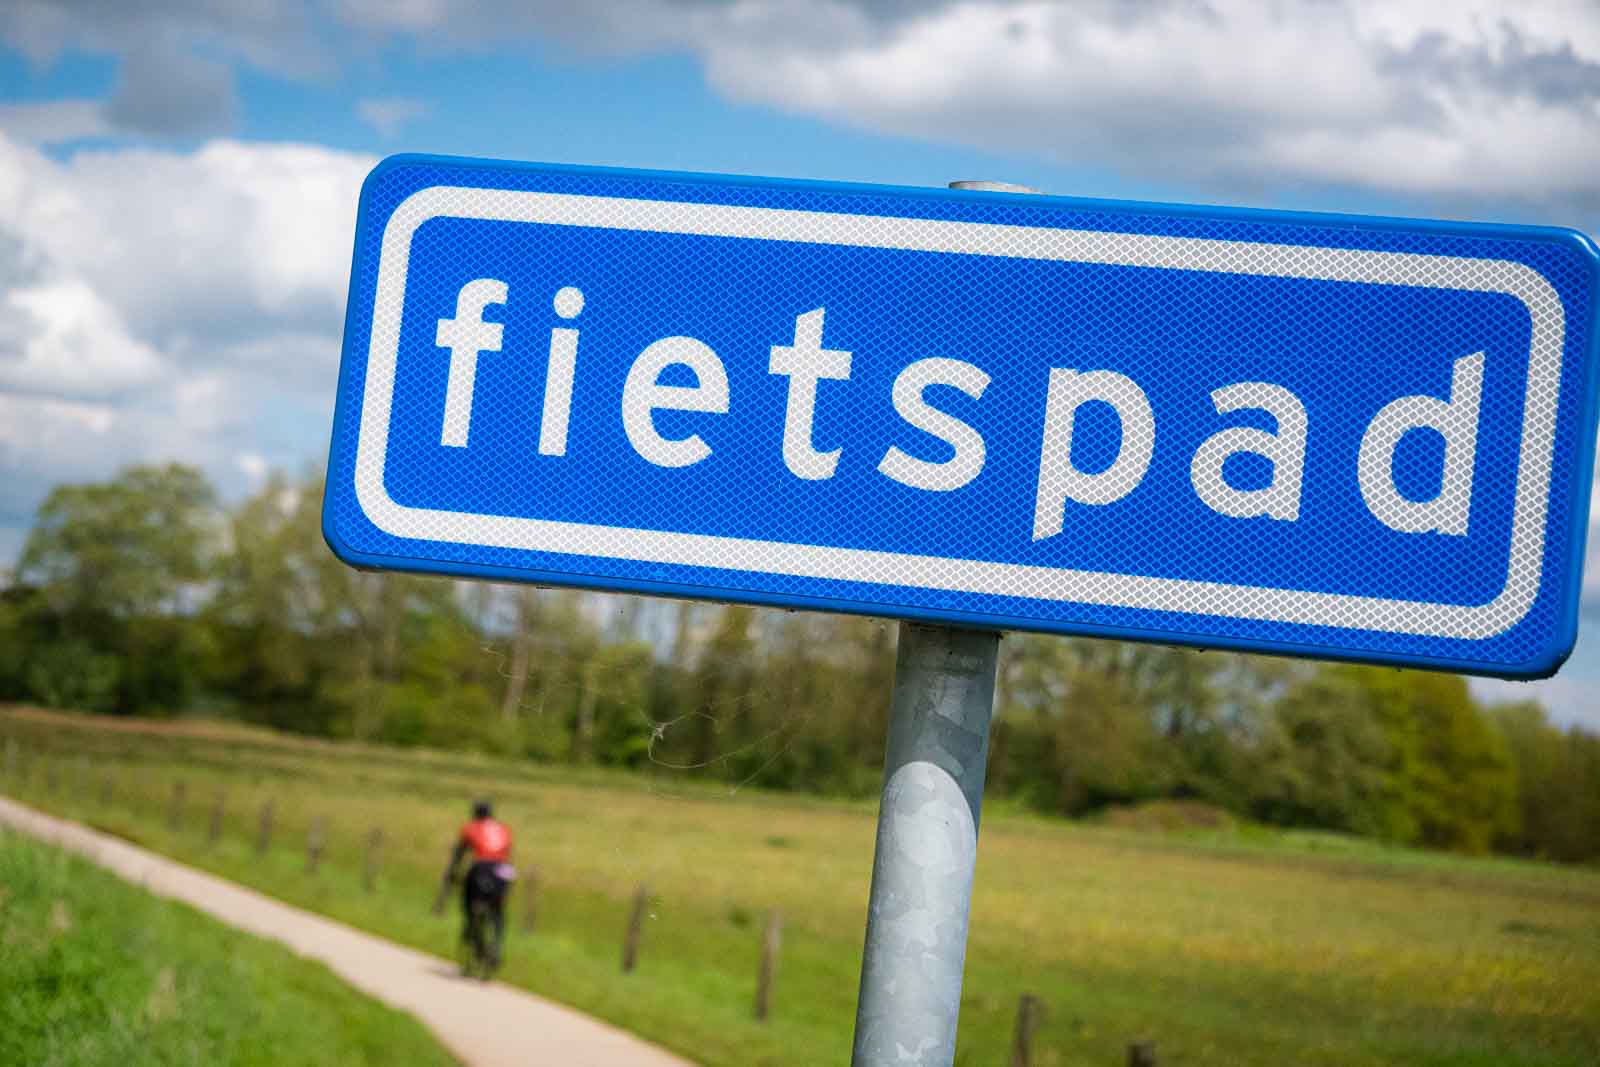 In the foreground is a sign with the inscription "Fahrradweg" (cycle path) and, blurred below, a cyclist on the cycle path